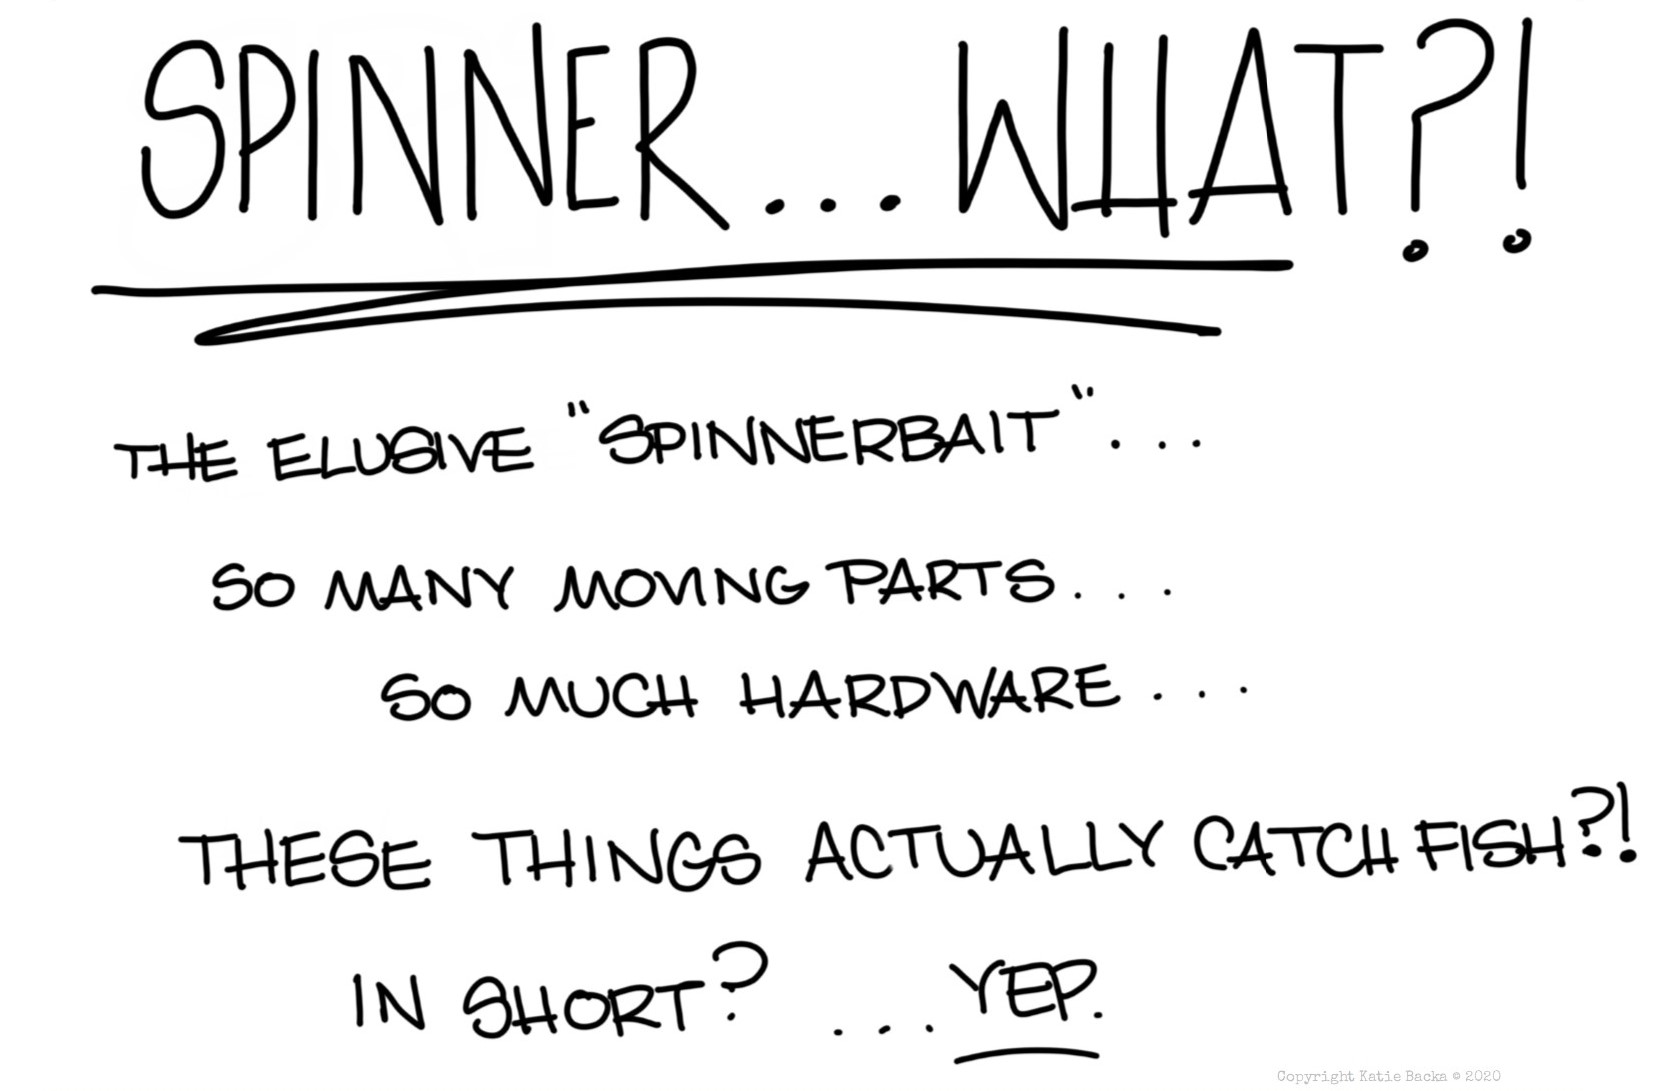 text: Spinner...what?! The elusive spinnerbait. So many moving parts. So much hardware. These things actually catch fish?! In short? Yep.